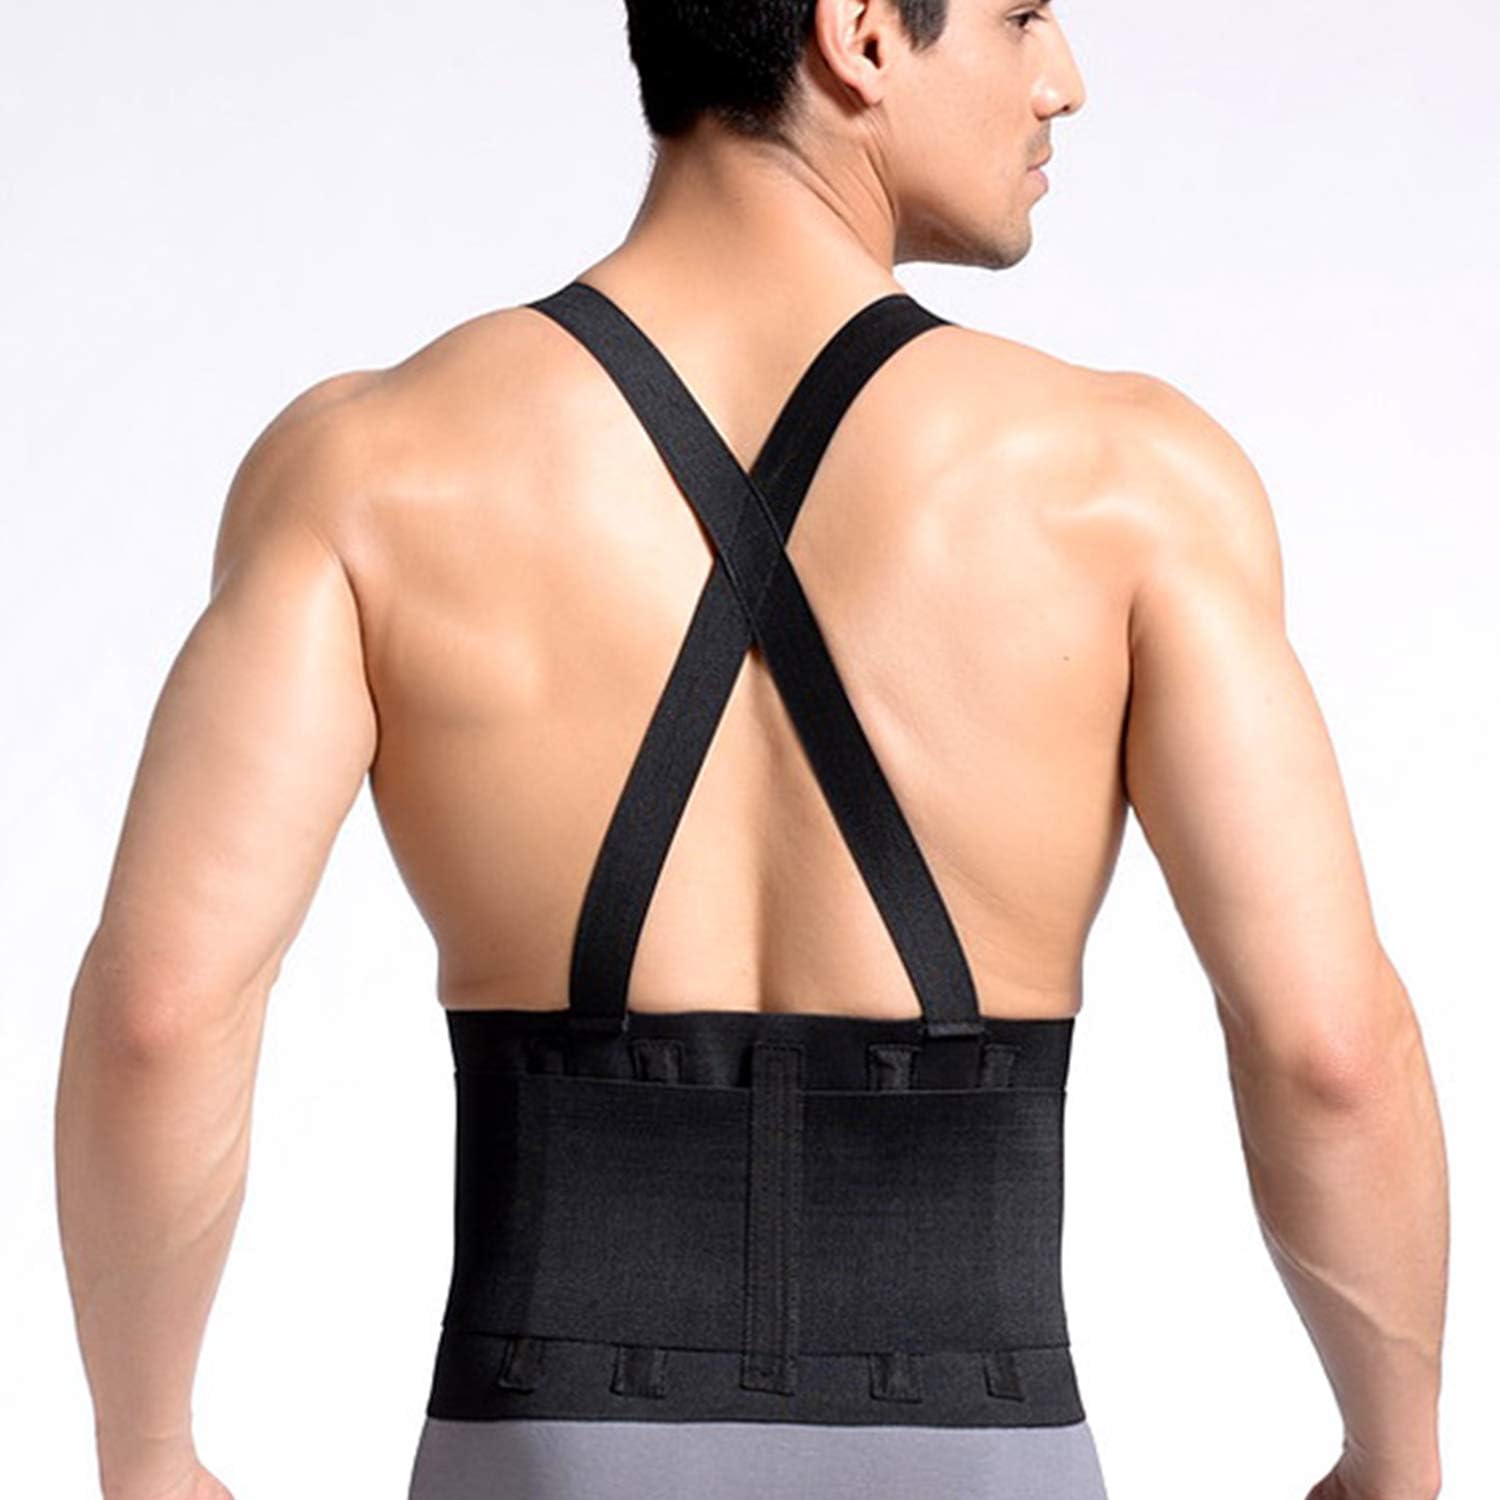 CROSS1946 Work Back Brace,Lumbar Support with Adjustable Suspenders for Industrial Work, Weightlifting,Back Pain Relife,Heavy Lifting Saf